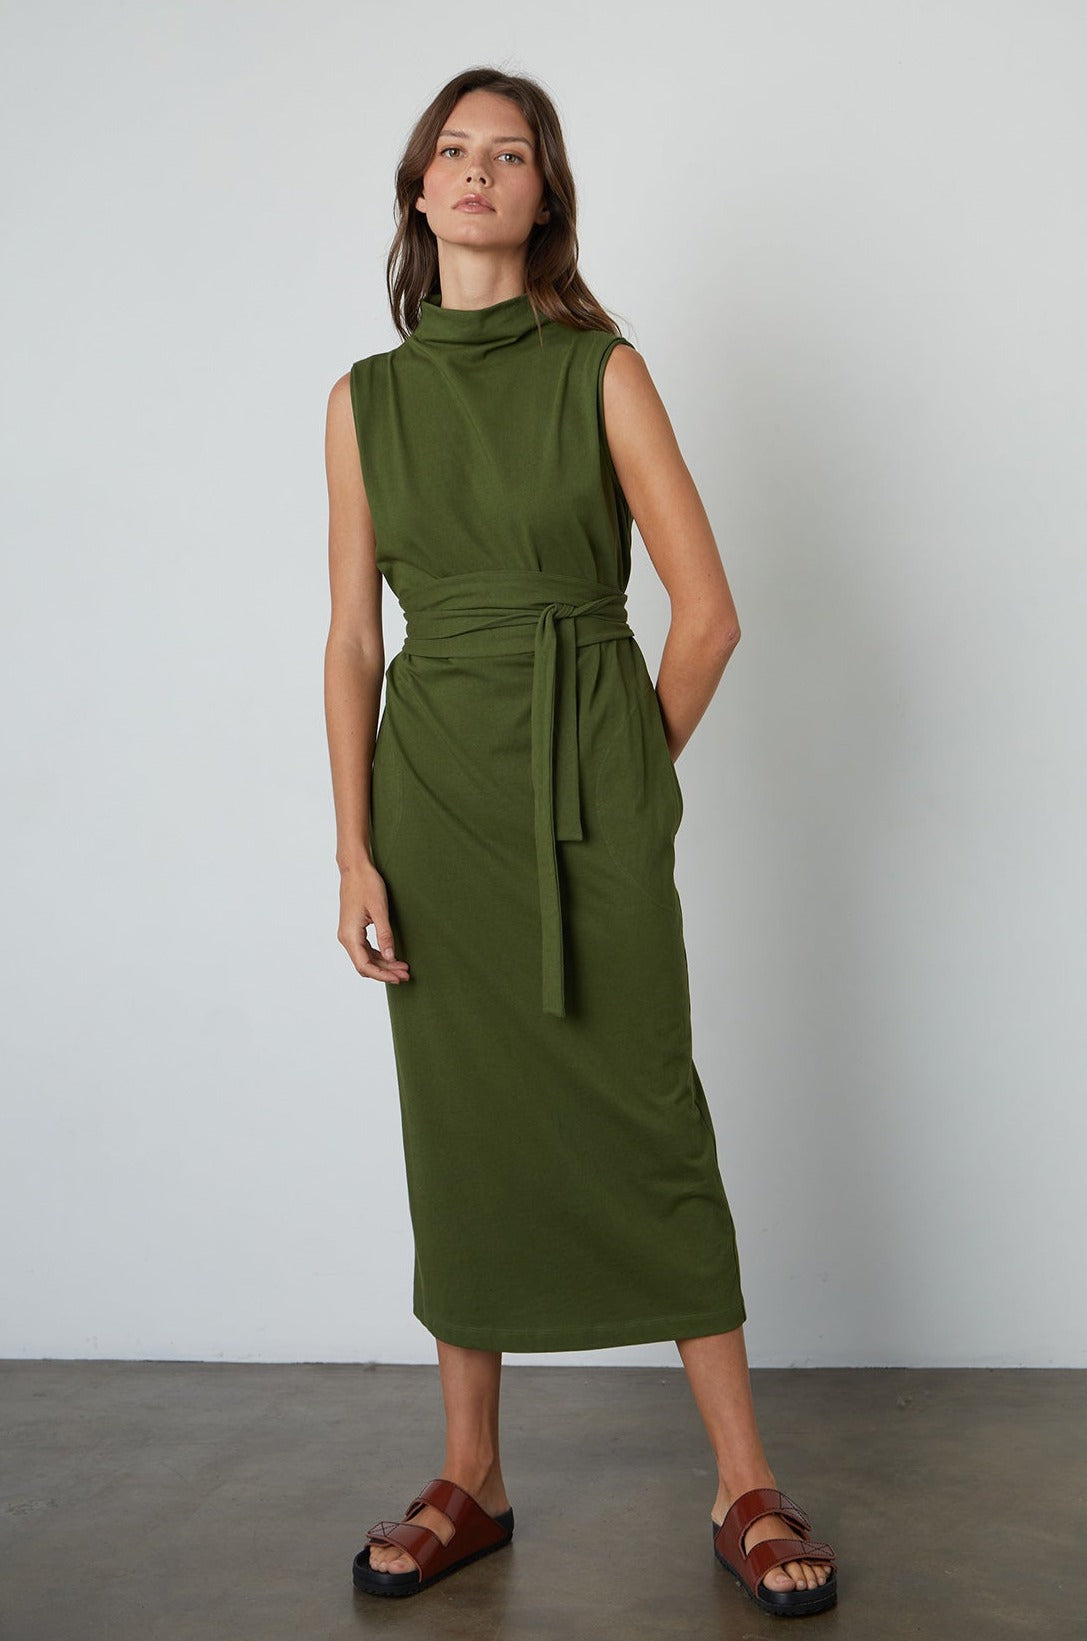   Hydie Mock Neck Dress Structured Cotton in Evergreen with belt front view 2 